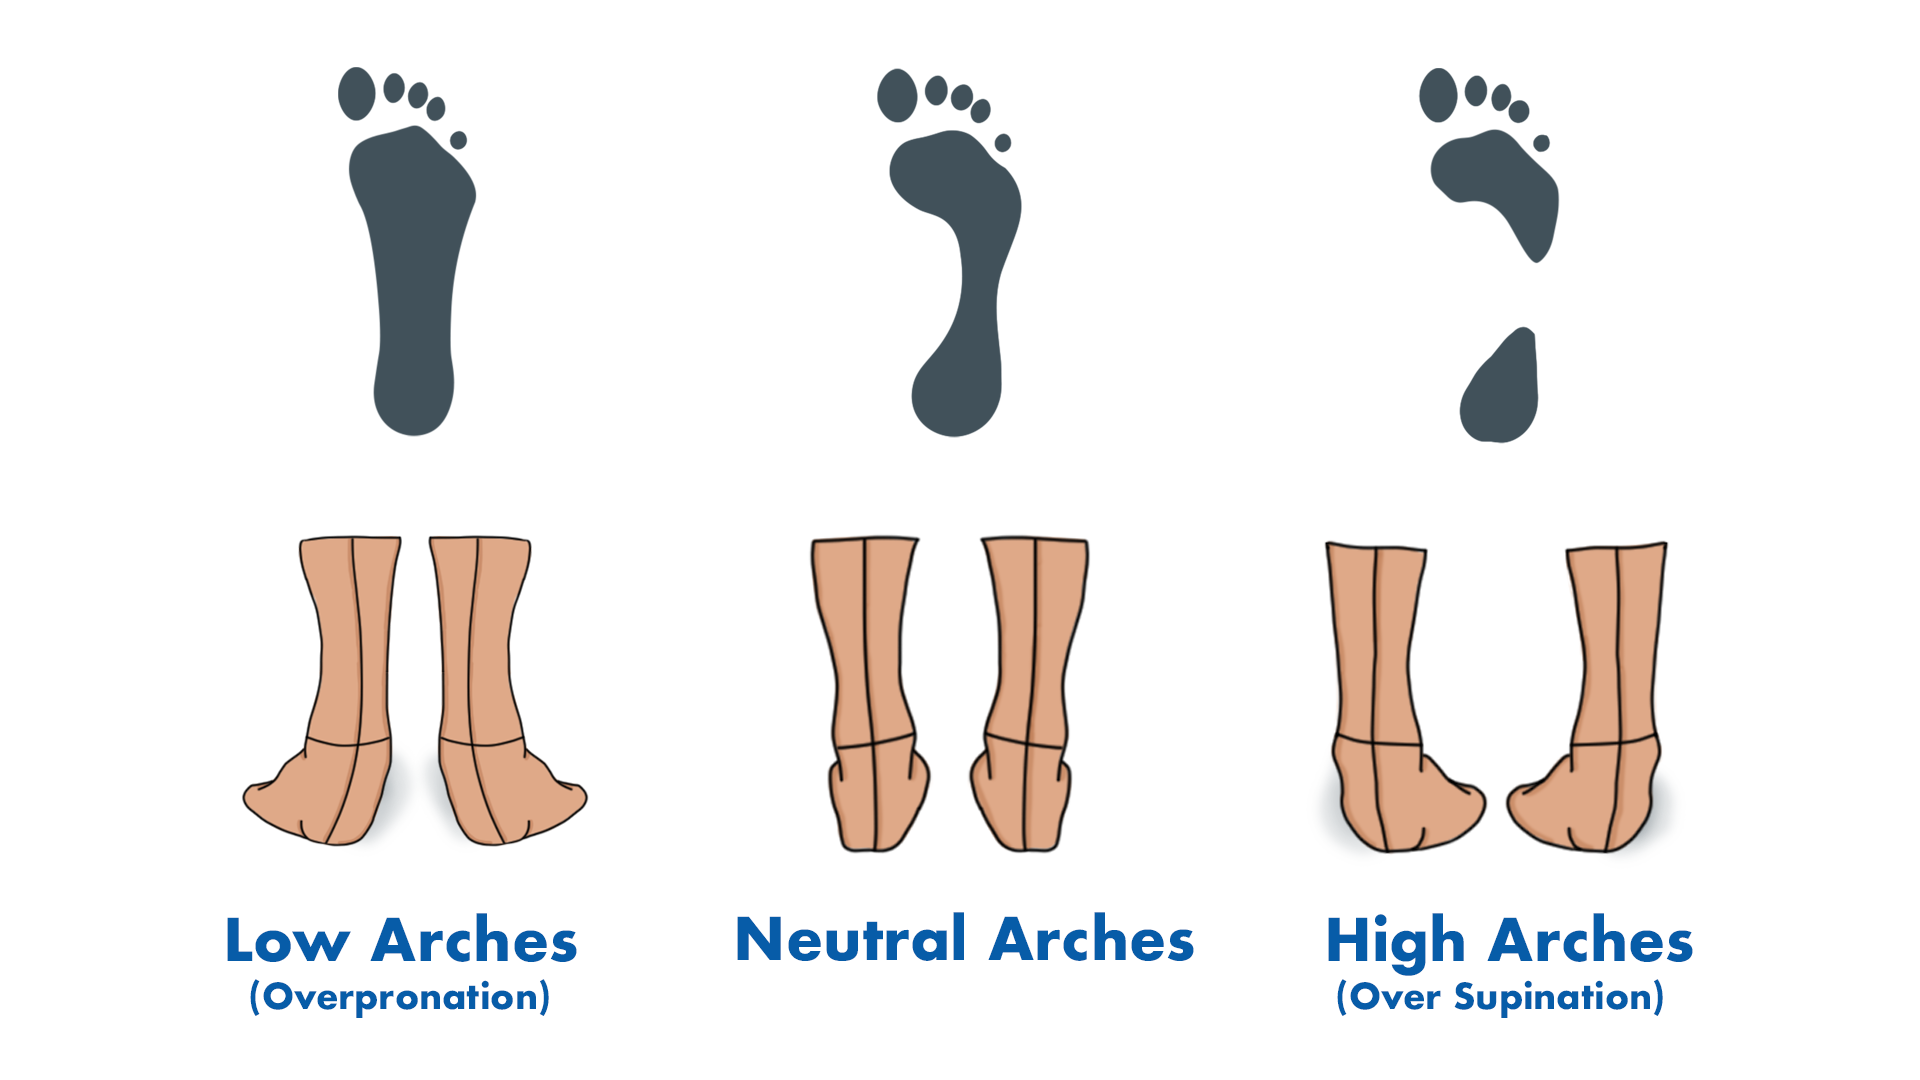 Foot arches infographic. Low arches, normal arches, and high arches